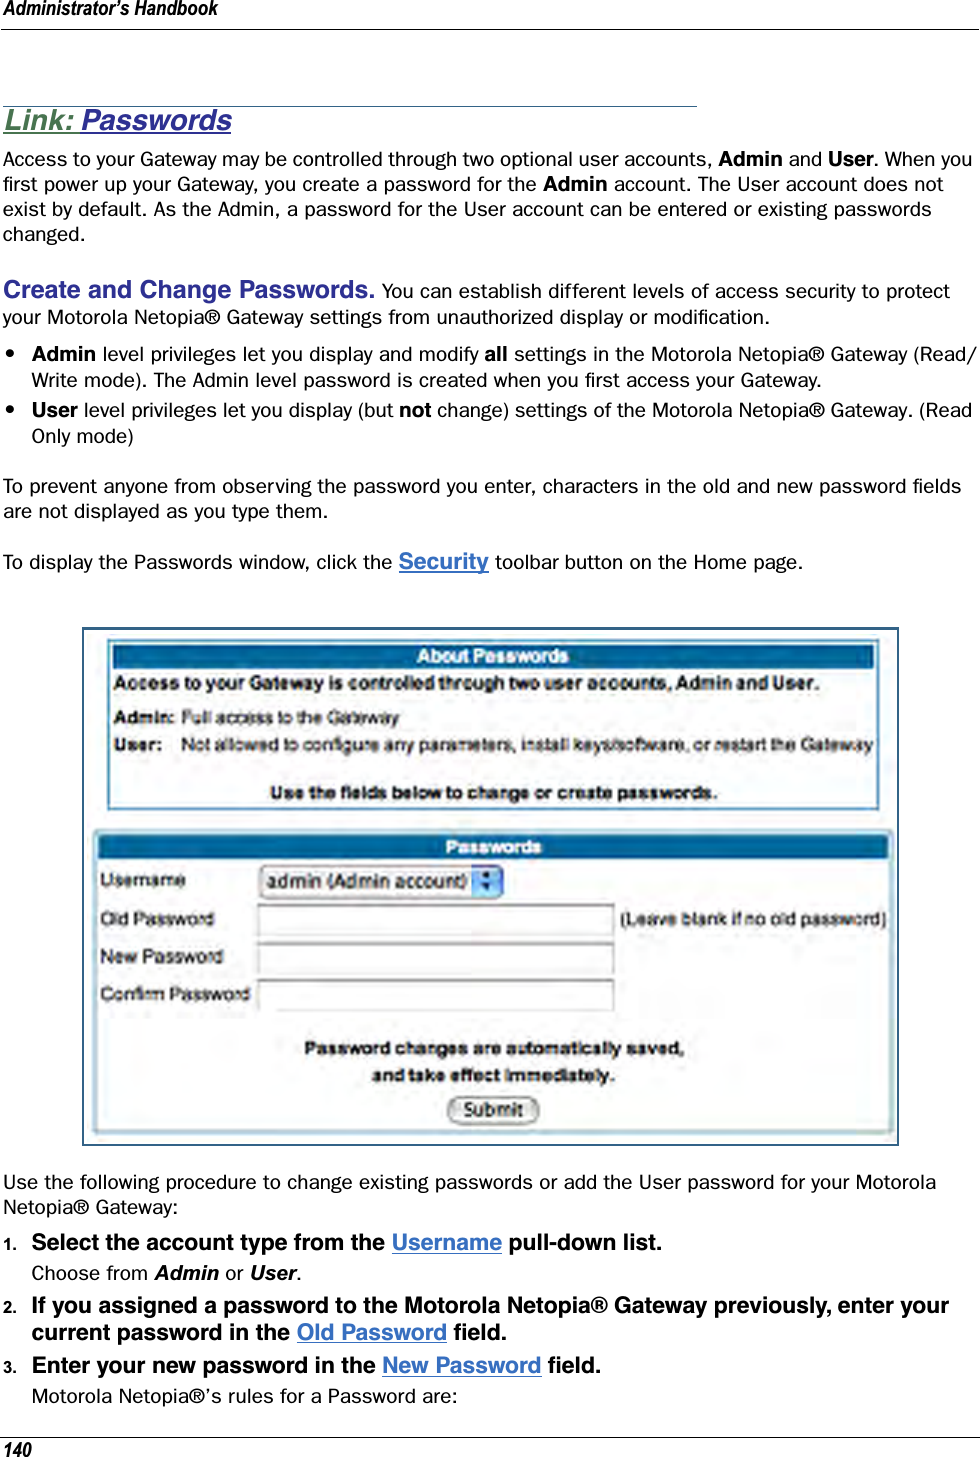 Administrator’s Handbook140Link: PasswordsAccess to your Gateway may be controlled through two optional user accounts, Admin and User. When you ﬁrst power up your Gateway, you create a password for the Admin account. The User account does not exist by default. As the Admin, a password for the User account can be entered or existing passwords changed.Create and Change Passwords. You can establish different levels of access security to protect your Motorola Netopia® Gateway settings from unauthorized display or modiﬁcation.•Admin level privileges let you display and modify all settings in the Motorola Netopia® Gateway (Read/Write mode). The Admin level password is created when you ﬁrst access your Gateway.•User level privileges let you display (but not change) settings of the Motorola Netopia® Gateway. (Read Only mode)To prevent anyone from observing the password you enter, characters in the old and new password ﬁelds are not displayed as you type them. To display the Passwords window, click the Security toolbar button on the Home page.Use the following procedure to change existing passwords or add the User password for your Motorola Netopia® Gateway:1. Select the account type from the Username pull-down list.Choose from Admin or User.2. If you assigned a password to the Motorola Netopia® Gateway previously, enter your current password in the Old Password ﬁeld.3. Enter your new password in the New Password ﬁeld.Motorola Netopia®’s rules for a Password are: